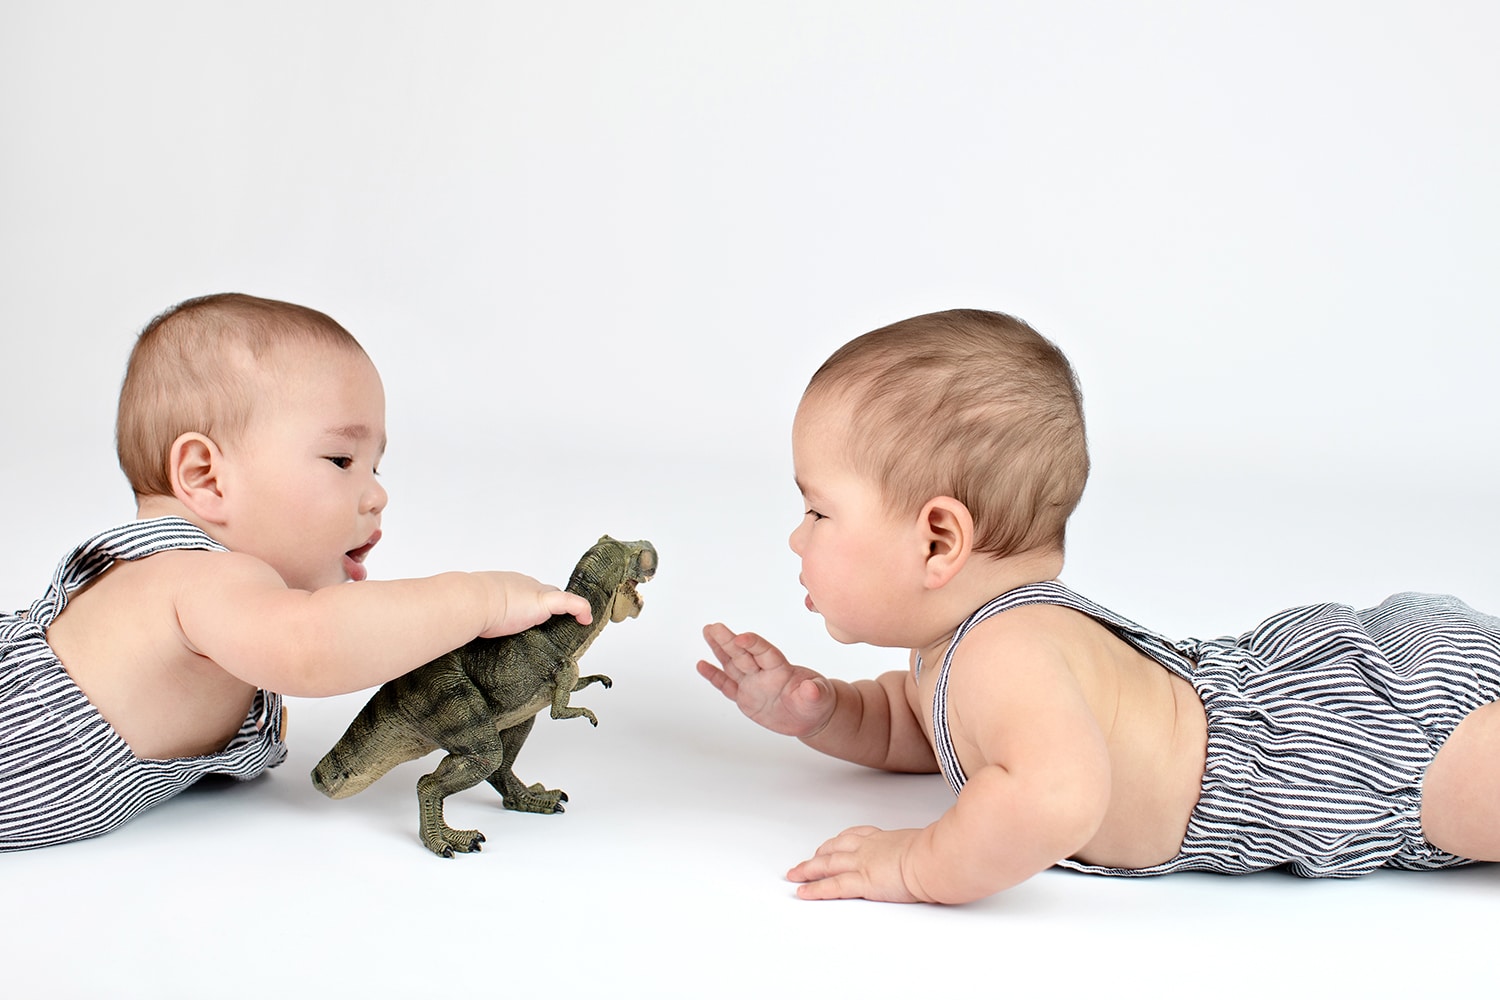 Two six month olds play with a toy dinosaur.